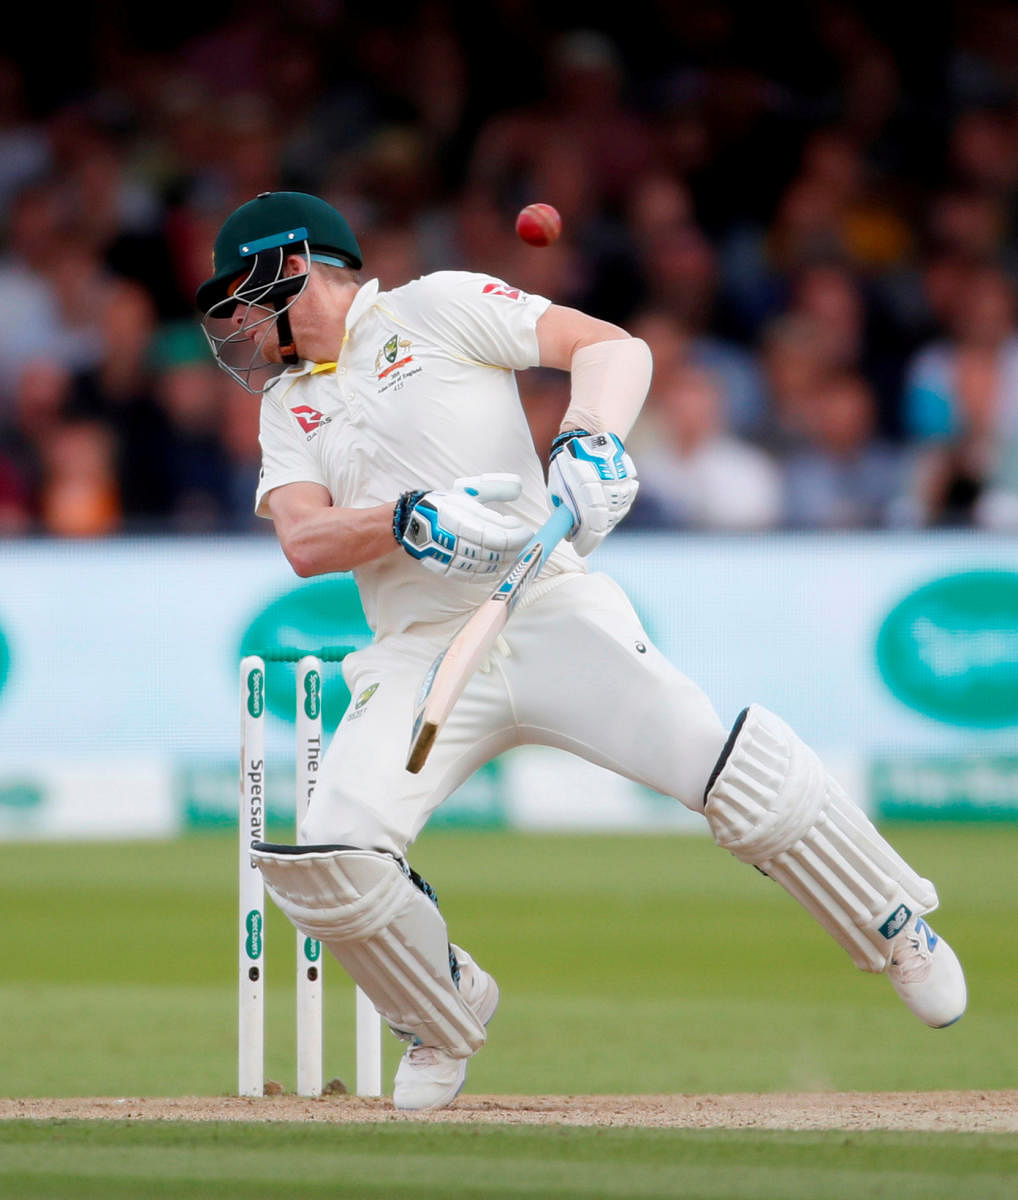 Steve Smith was stuck by a nasty Archer bouncer on his neck, forcing him to walk out midway and ruling him out of the third Test at Leeds (Reuters Photo)